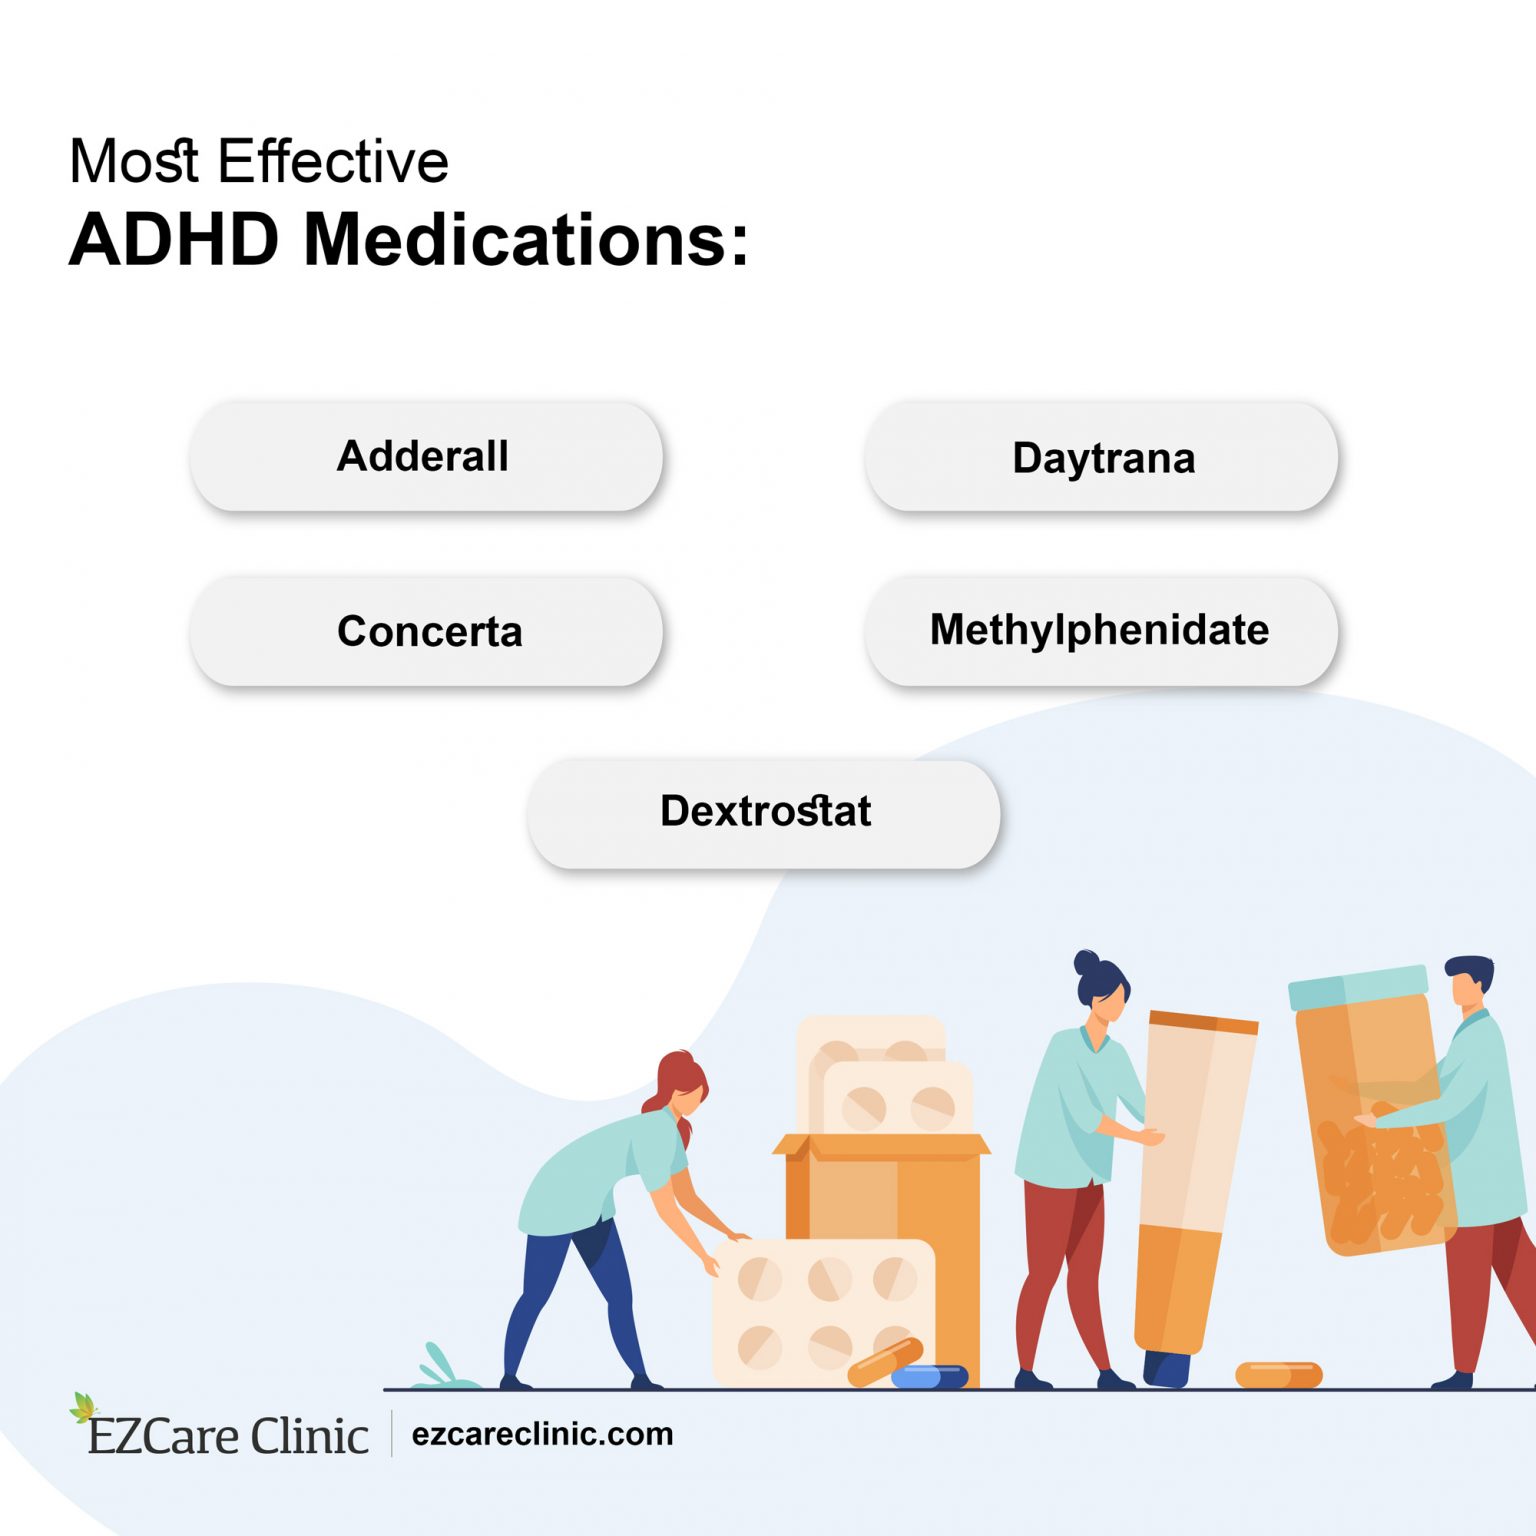 The New Insights of ADHD Treatments